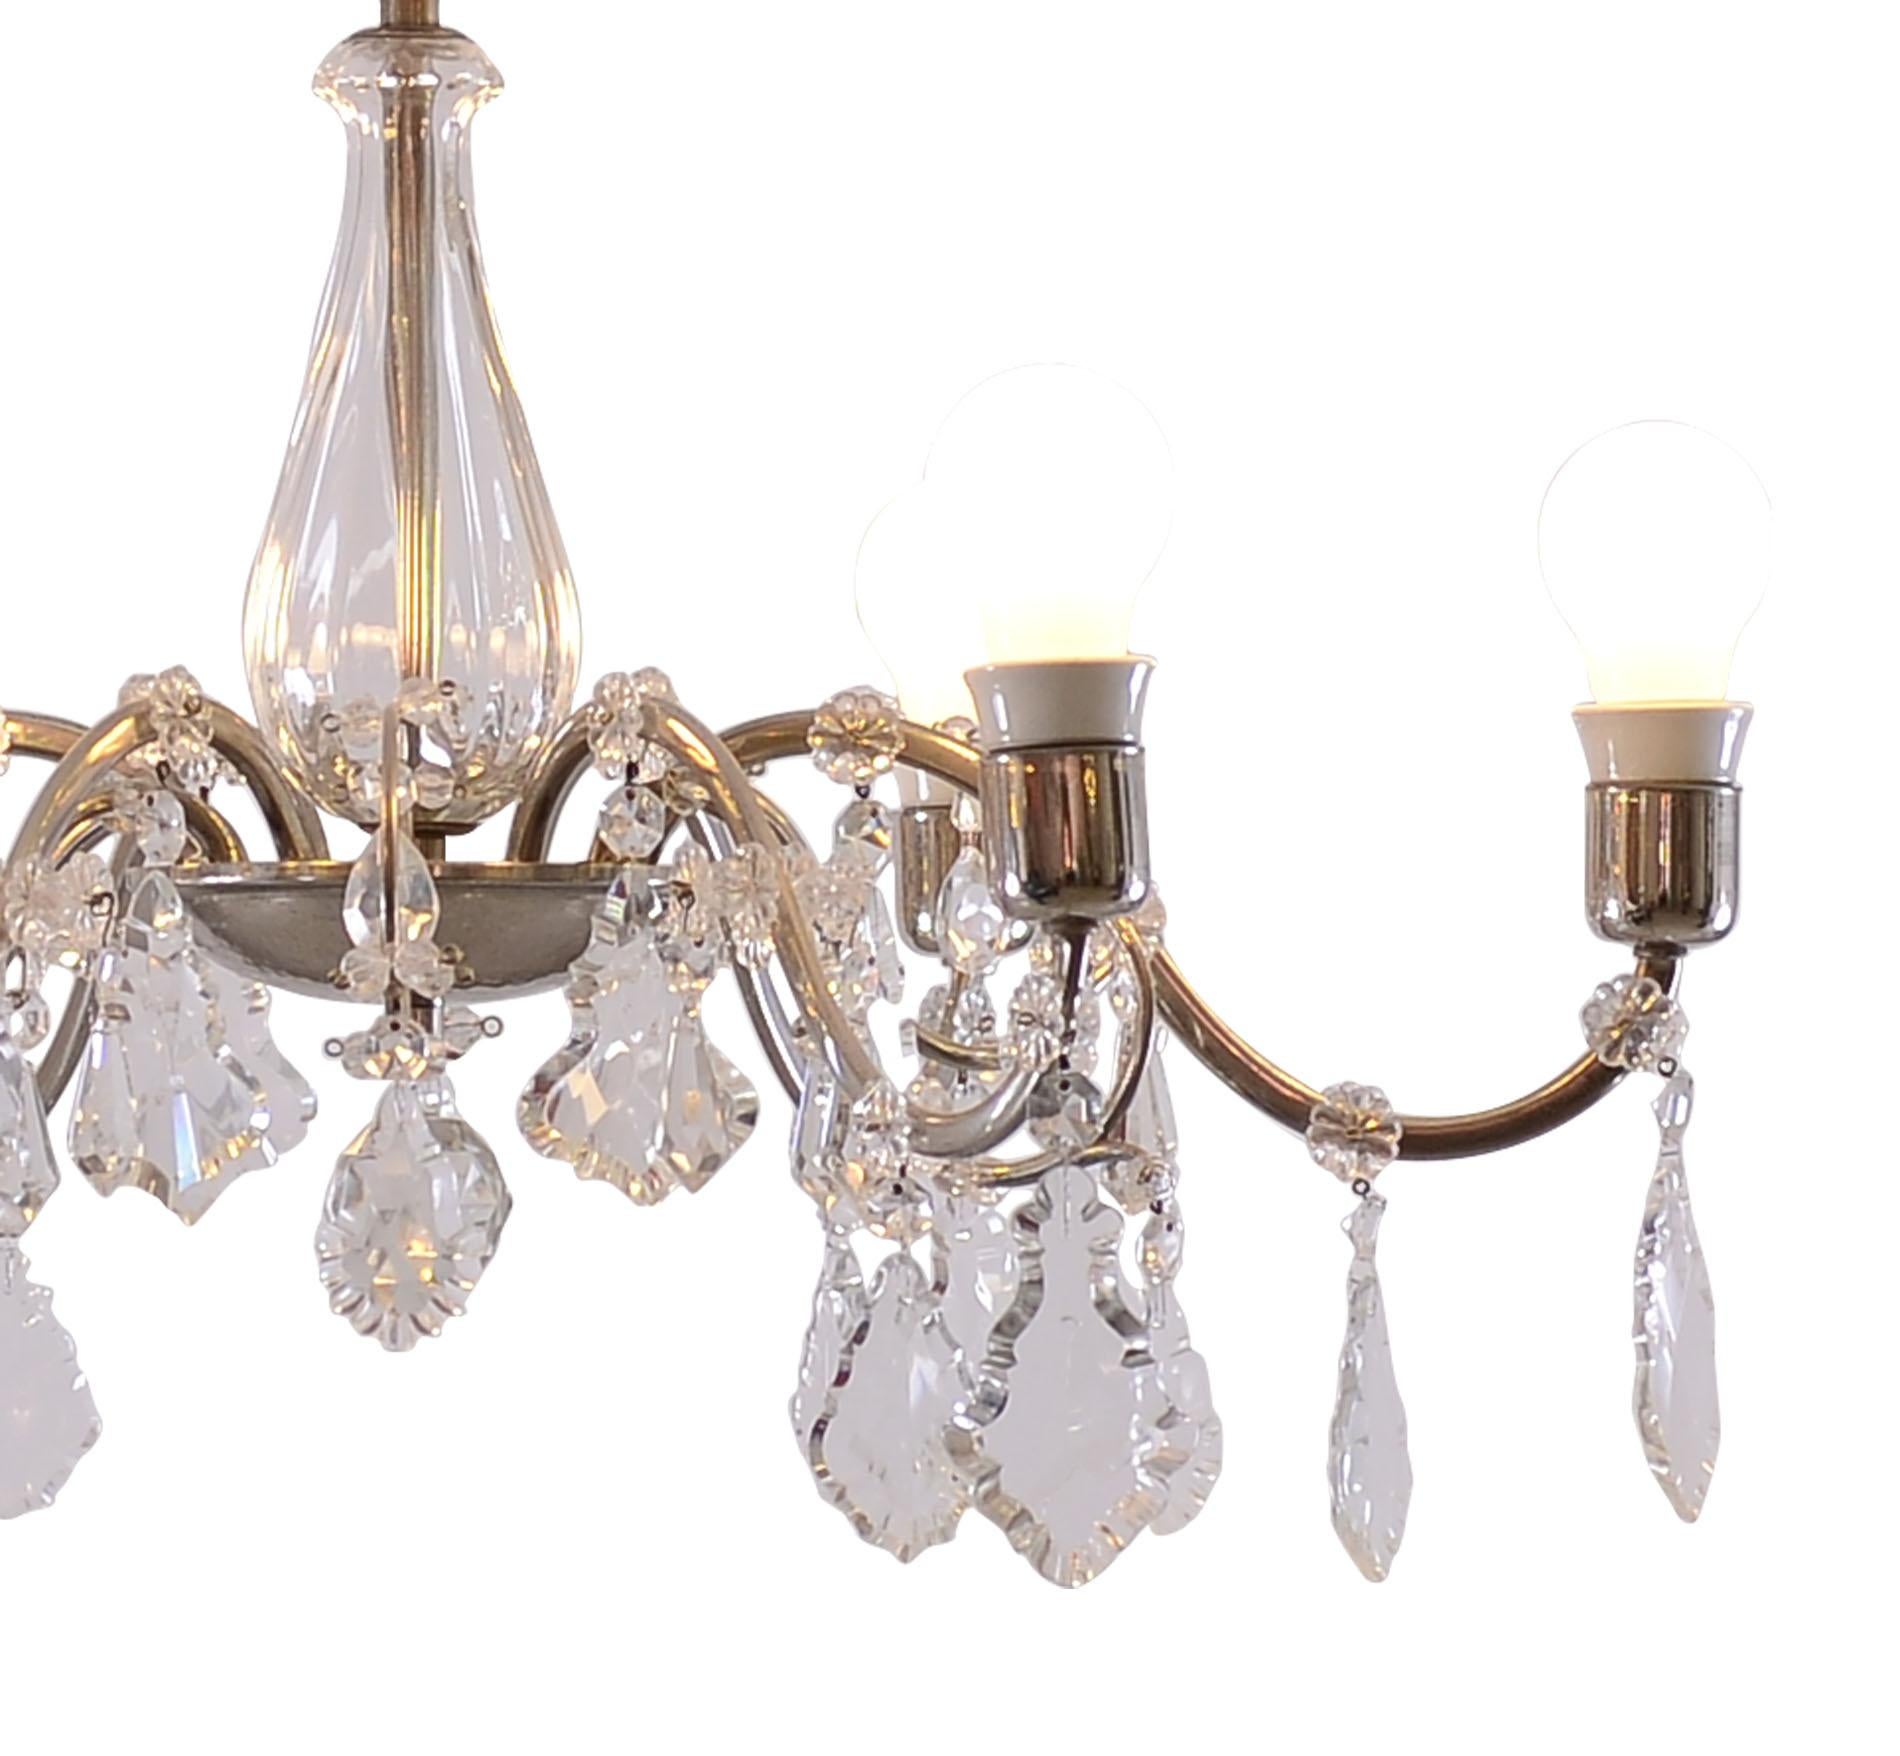 Hand-Crafted Charming Original Mid-Century Modern Brass and Crystal Glass Chandelier For Sale